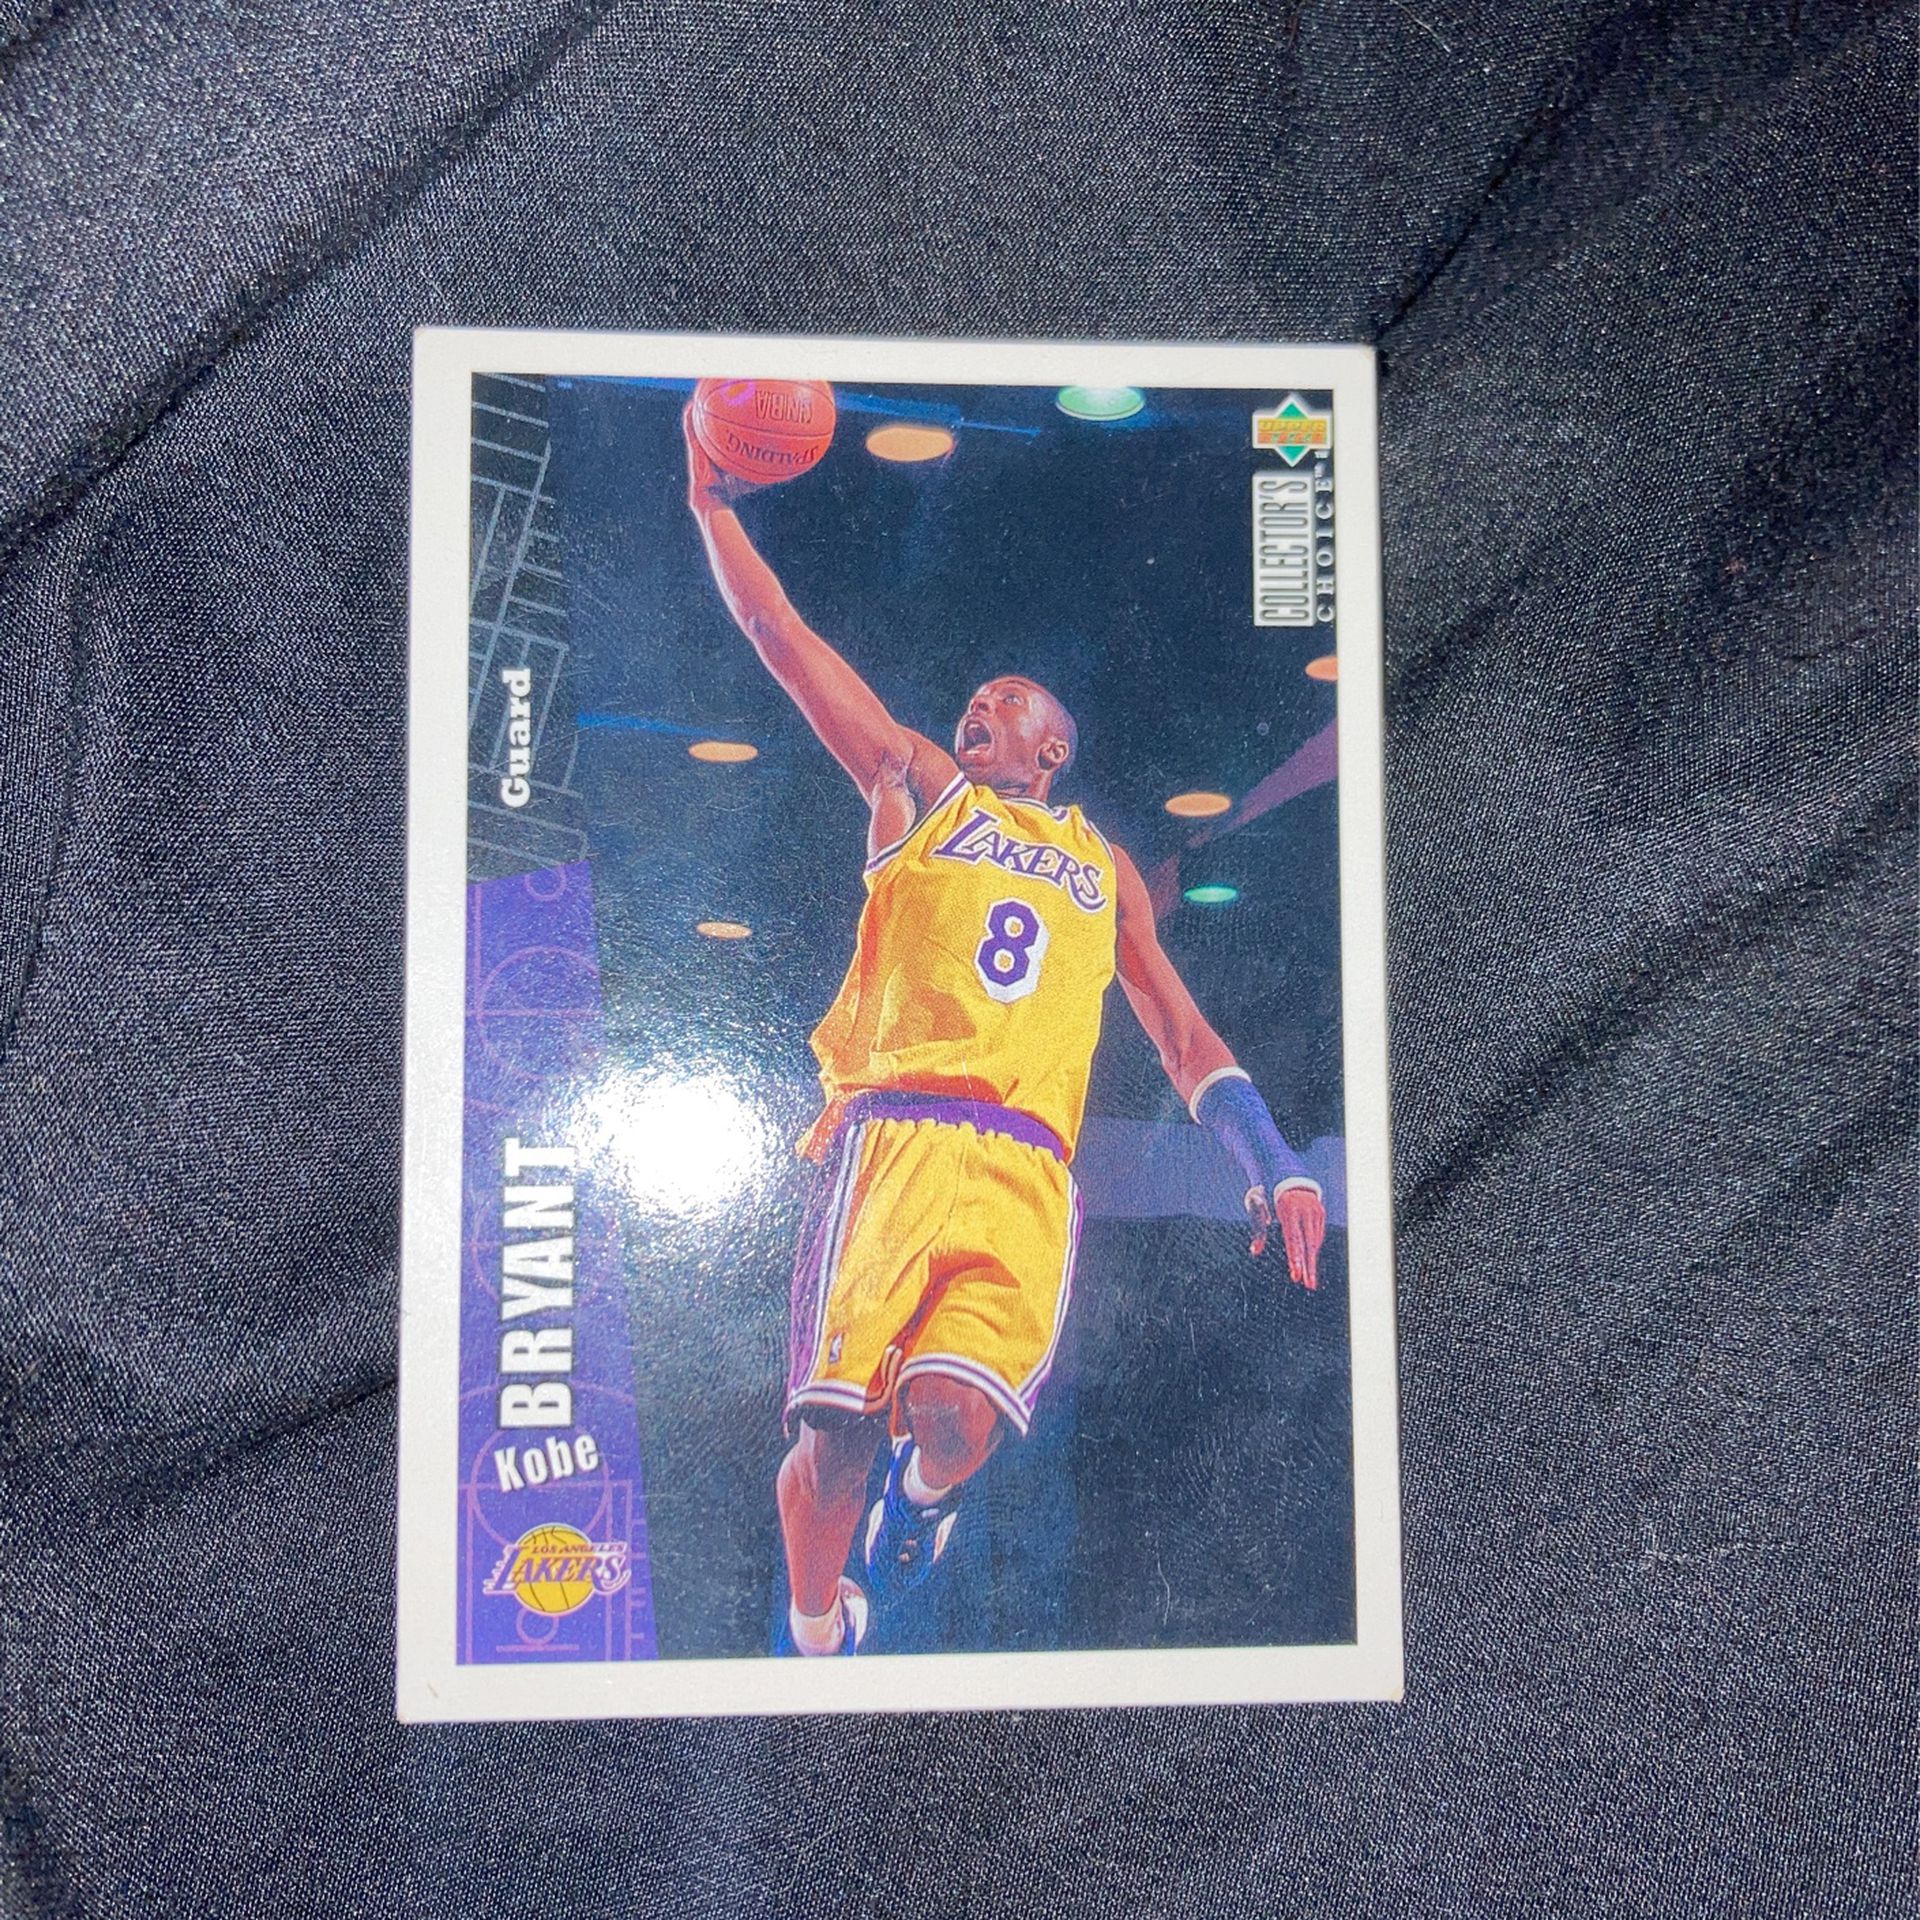 Kobe Bryant Rookie Card #(contact info removed)